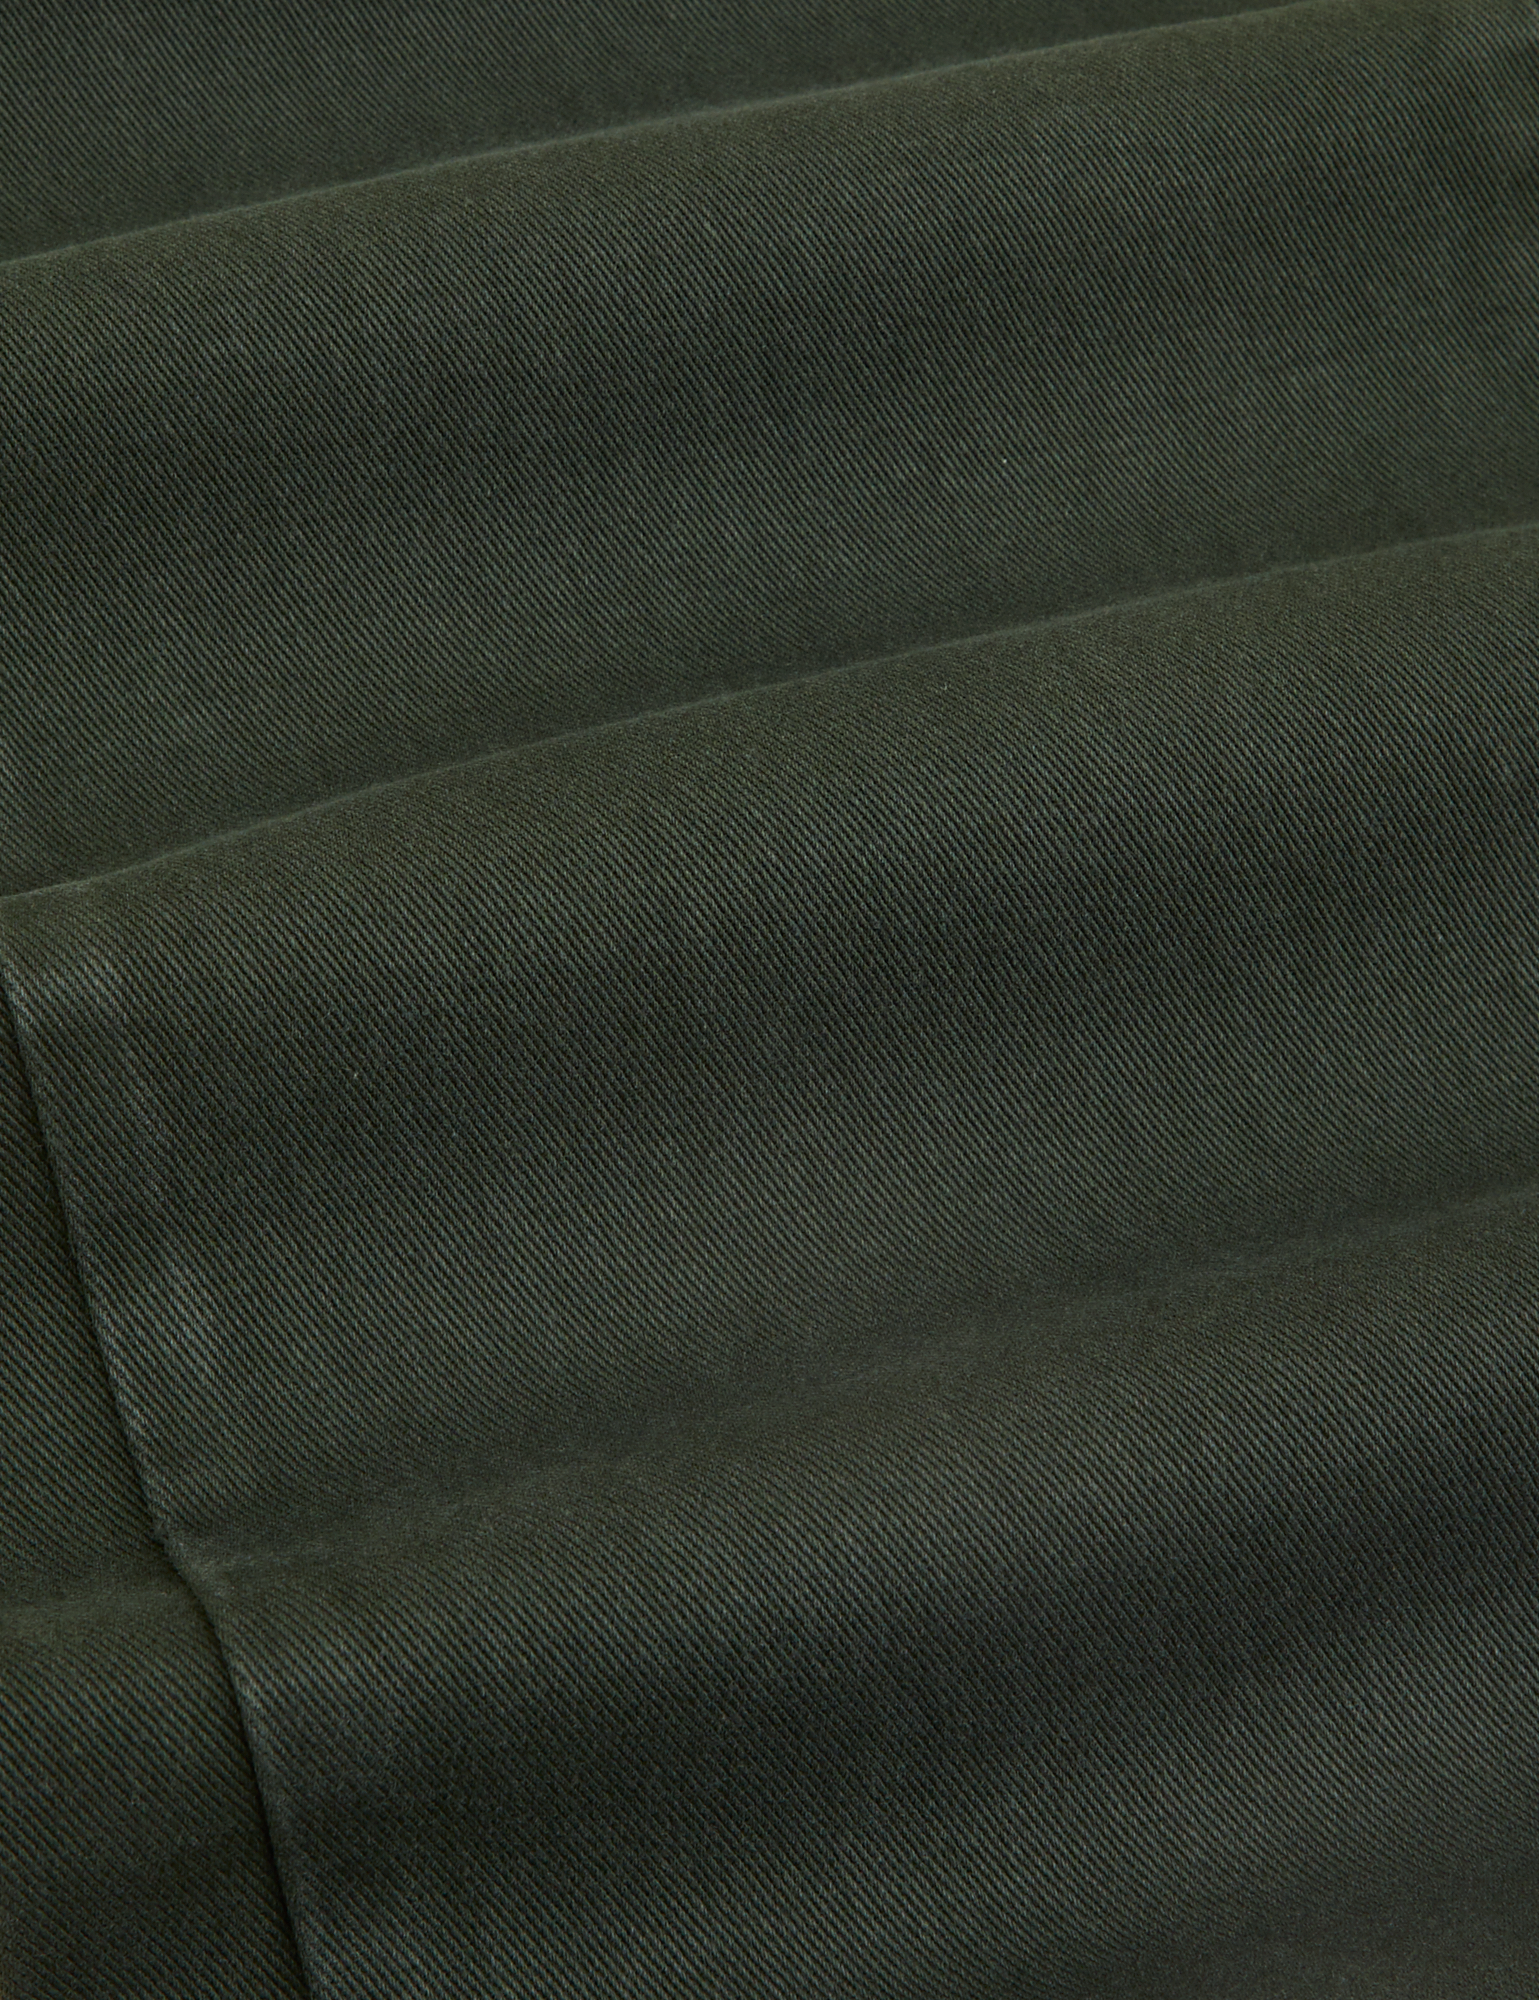 Work Pants in Swamp Green fabric detail close up